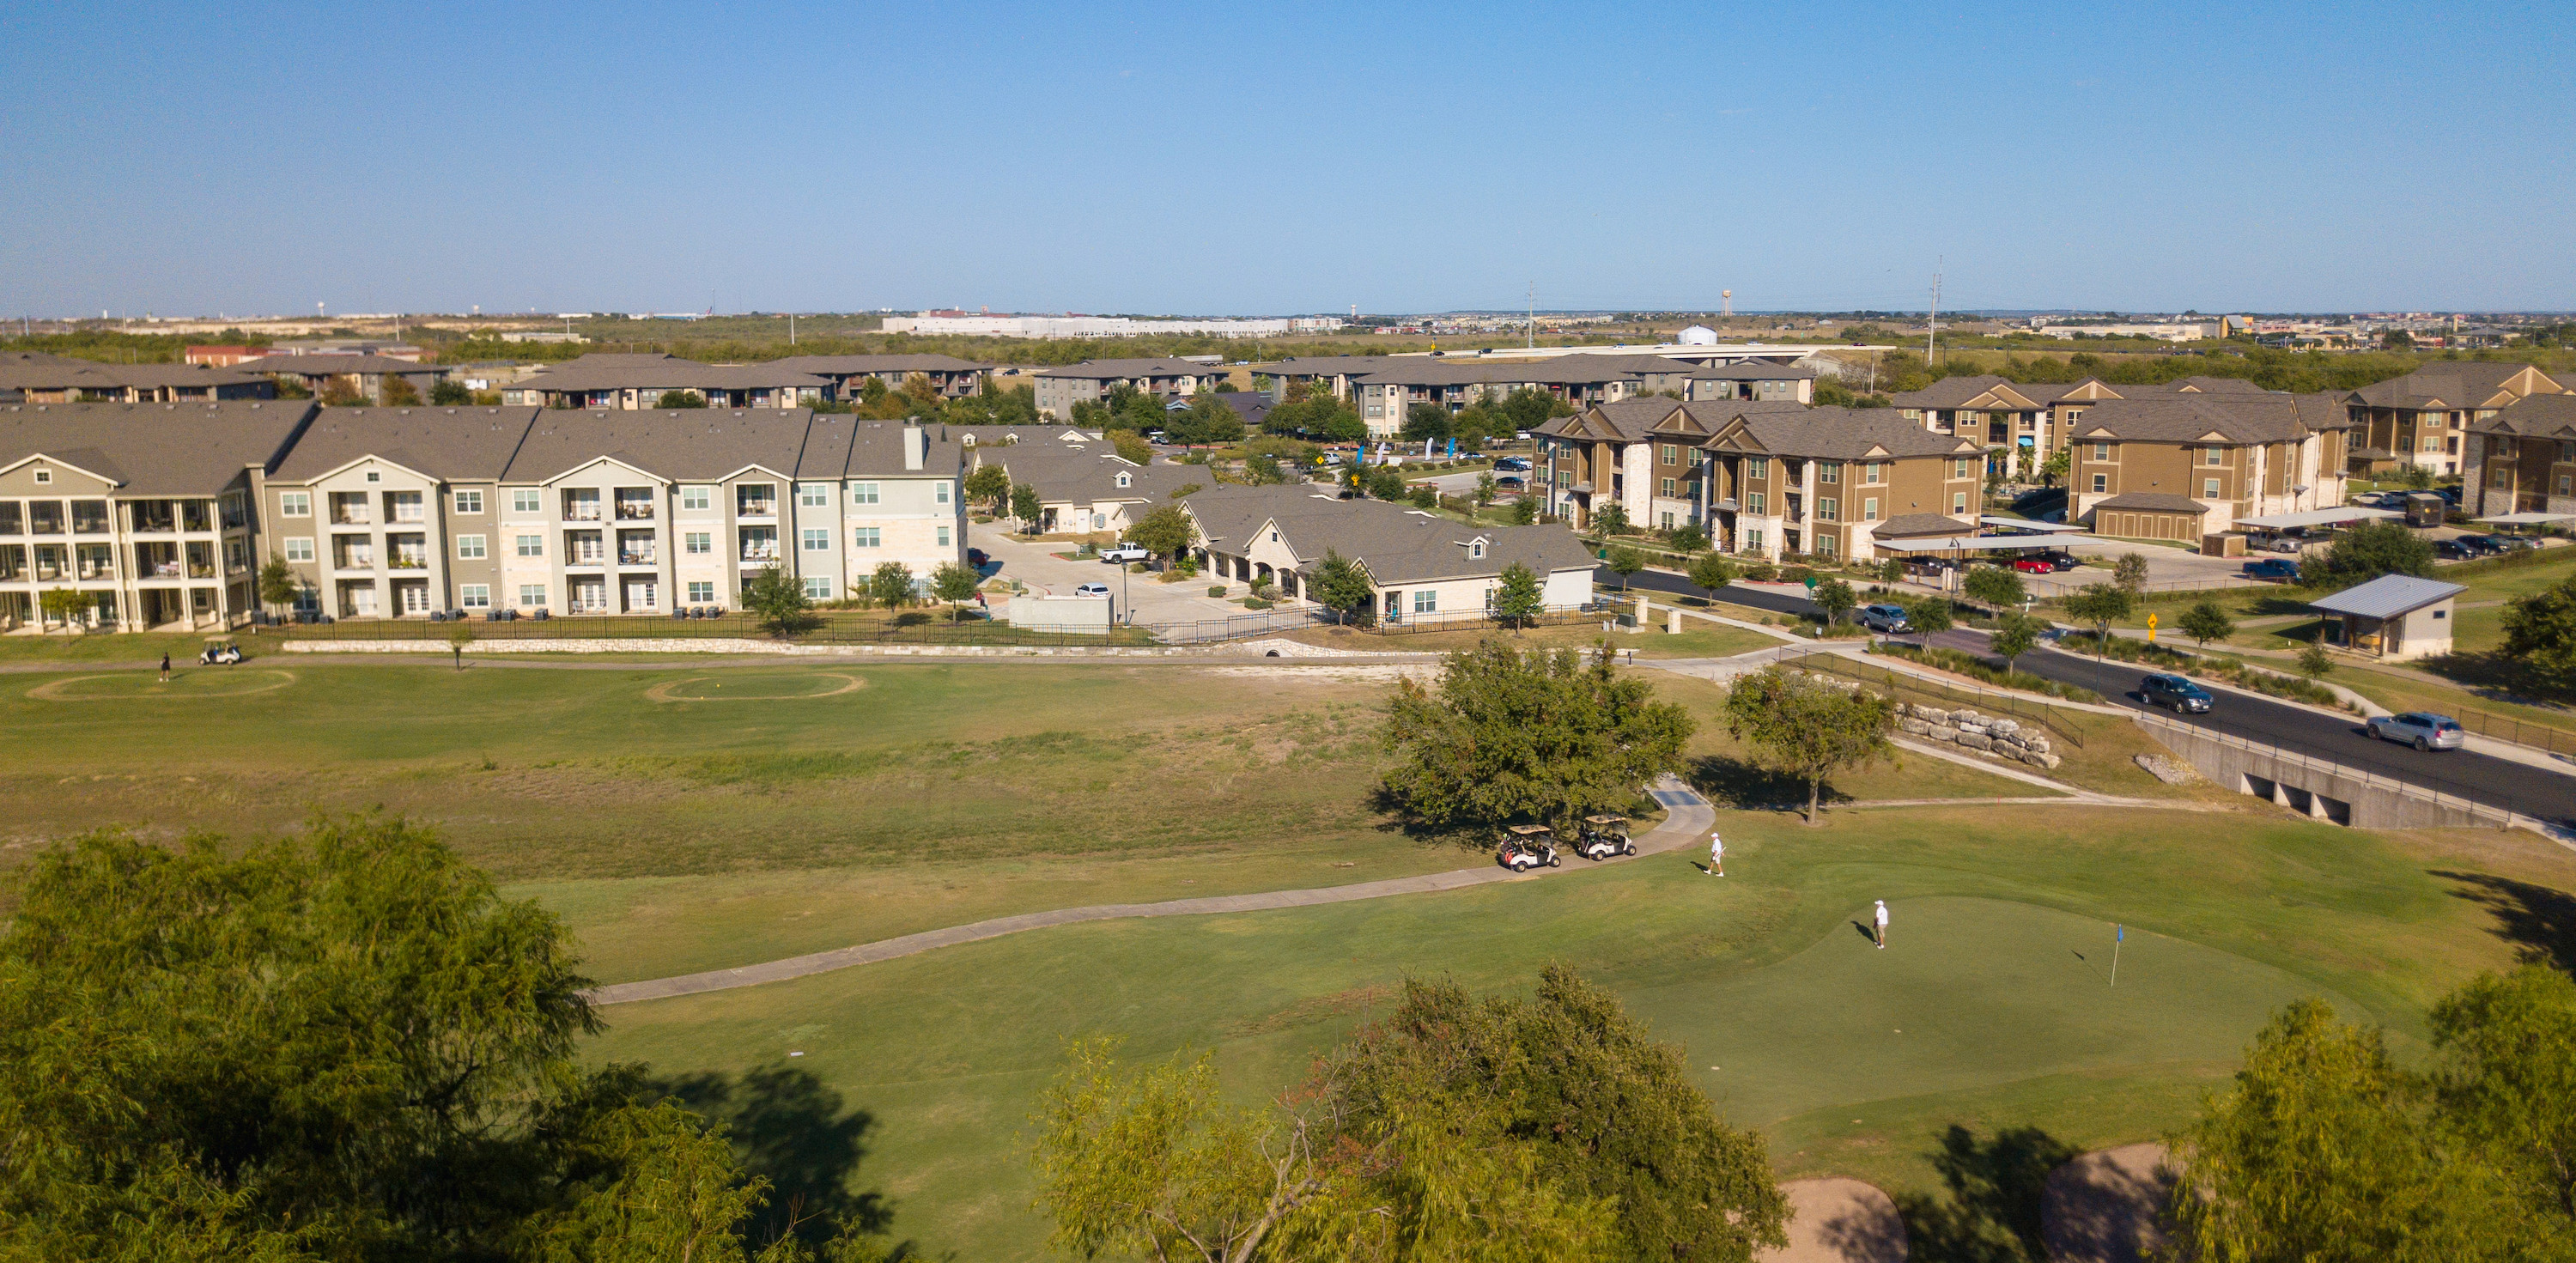 Drone shot of golf course with apartments in the background